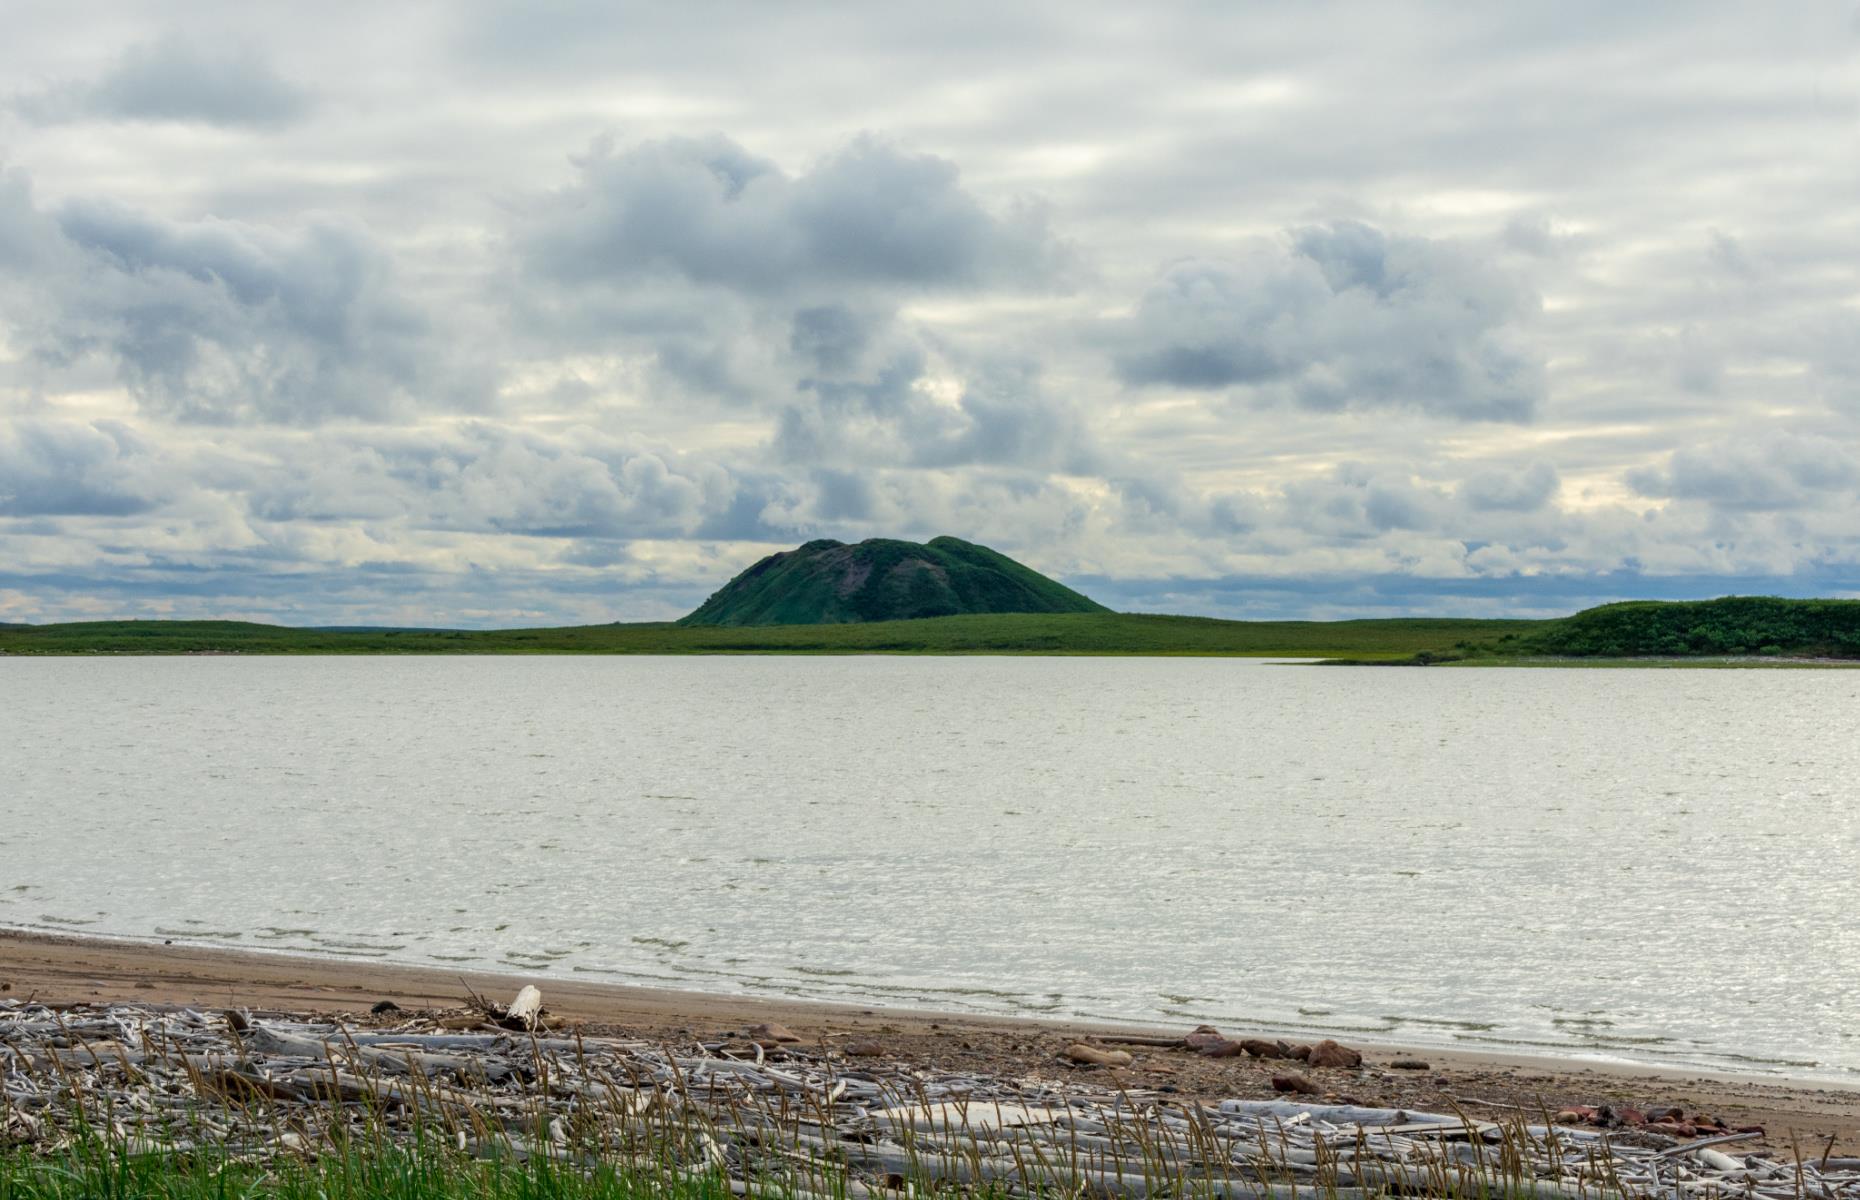 Once in Tuktoyaktuk (or “Tuk” as locals call it), visitors will find a small but friendly community of people who still routinely conduct whale and caribou hunts. The land is cold, but also beautiful, with large ice-cored hills called pingos cropping up in the frigid ocean near the shore. There aren’t many hotels or restaurants in Tuktoyaktuk, so visitors tend to head back to Inuvik after exploring the town and dipping their toes in the Arctic Ocean.